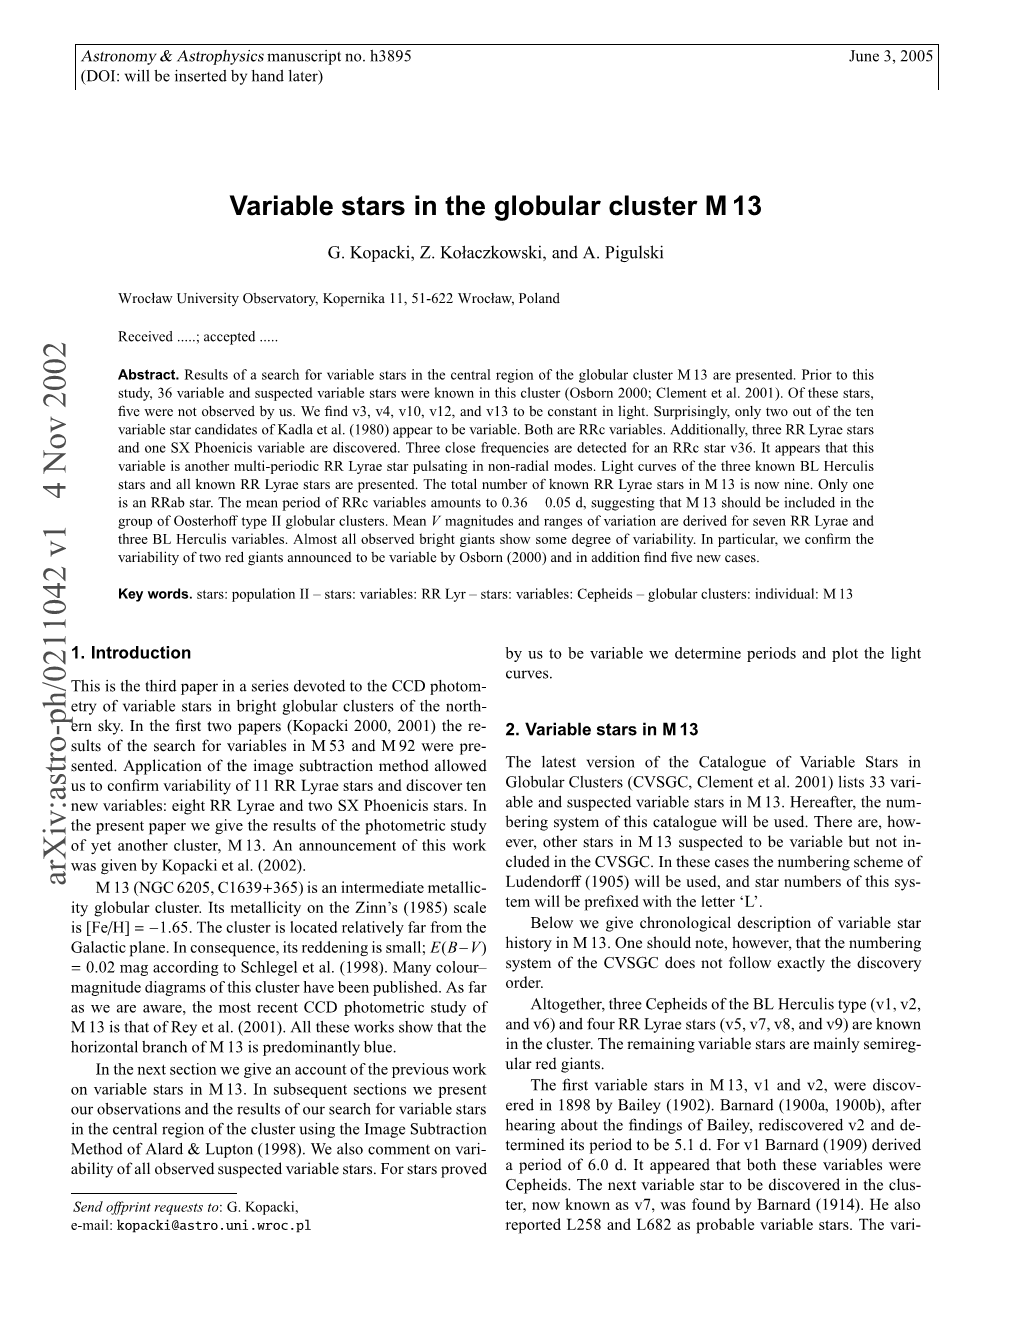 Variable Stars in the Globular Cluster M 13 Ability of V7 Was Conﬁrmed by Shapley (1915B)